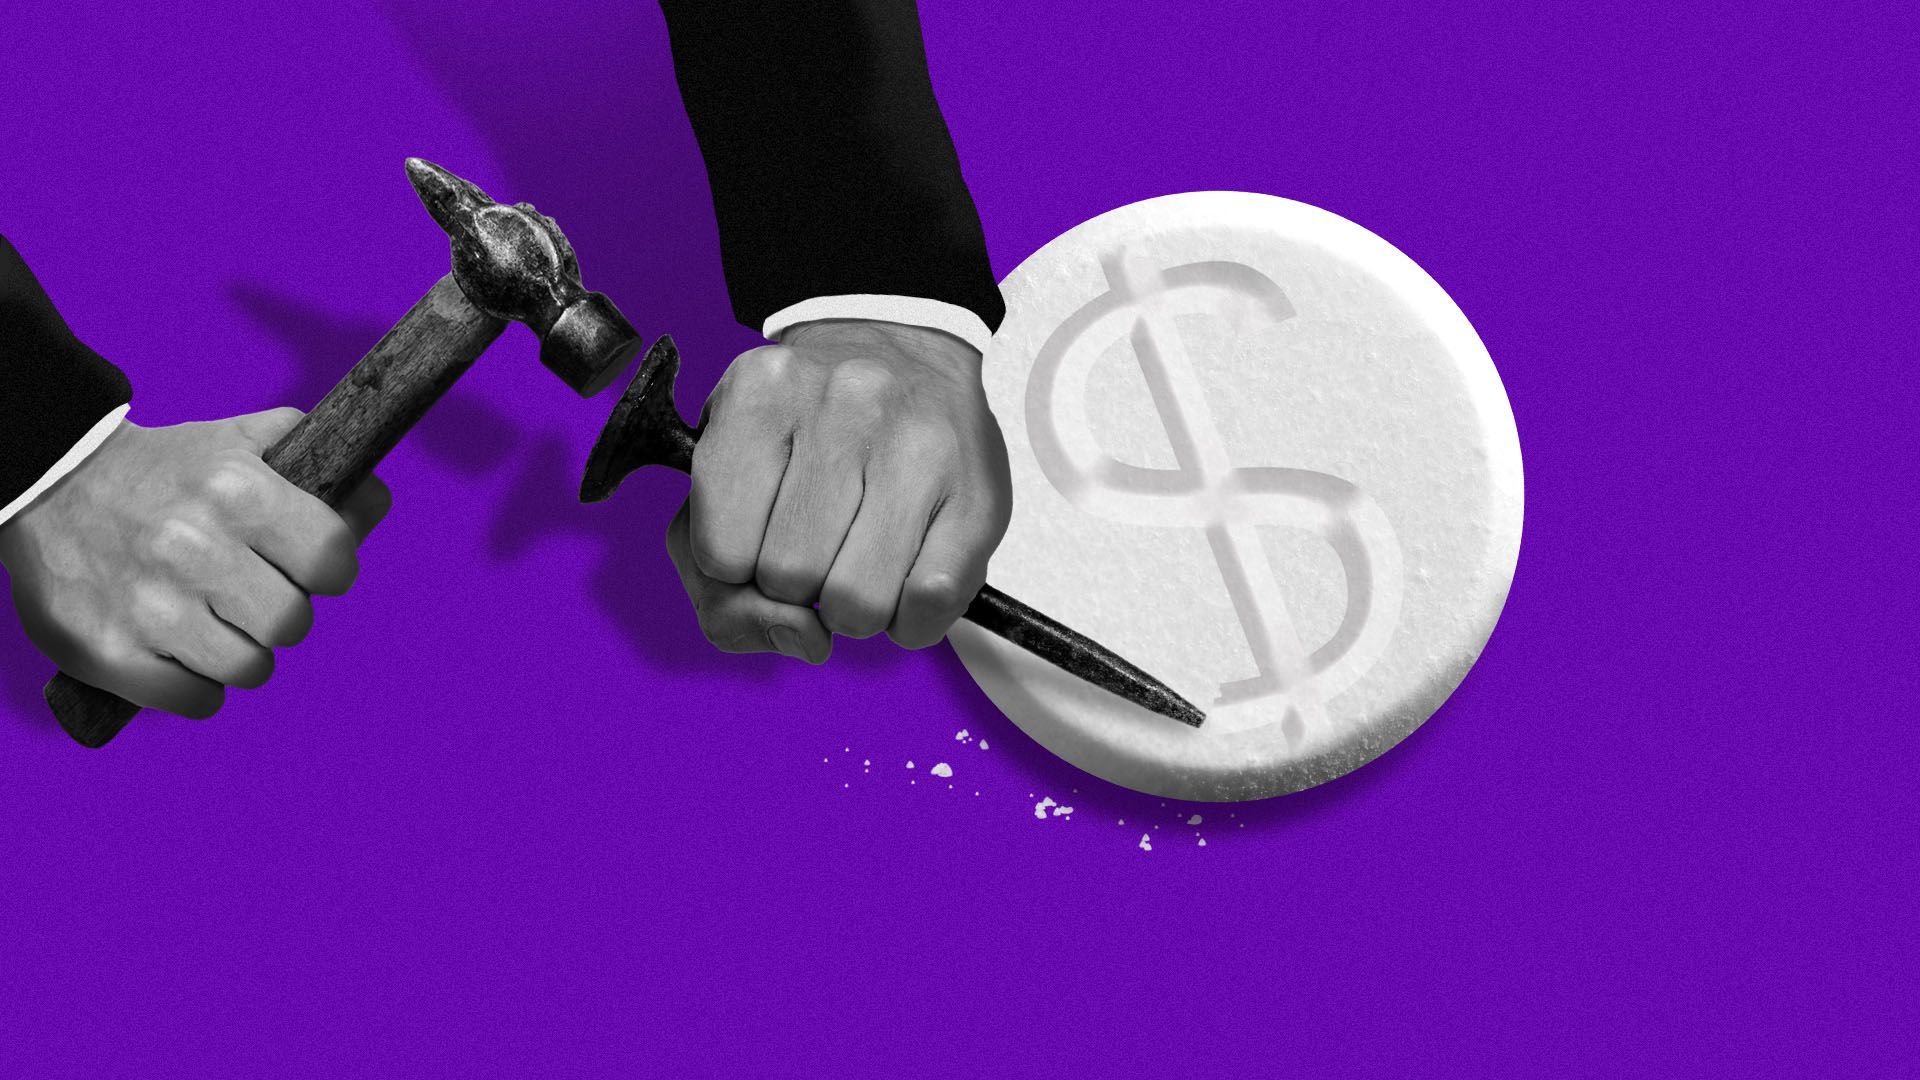 Illustration of hands in a suit chiseling a dollar sign into a pill